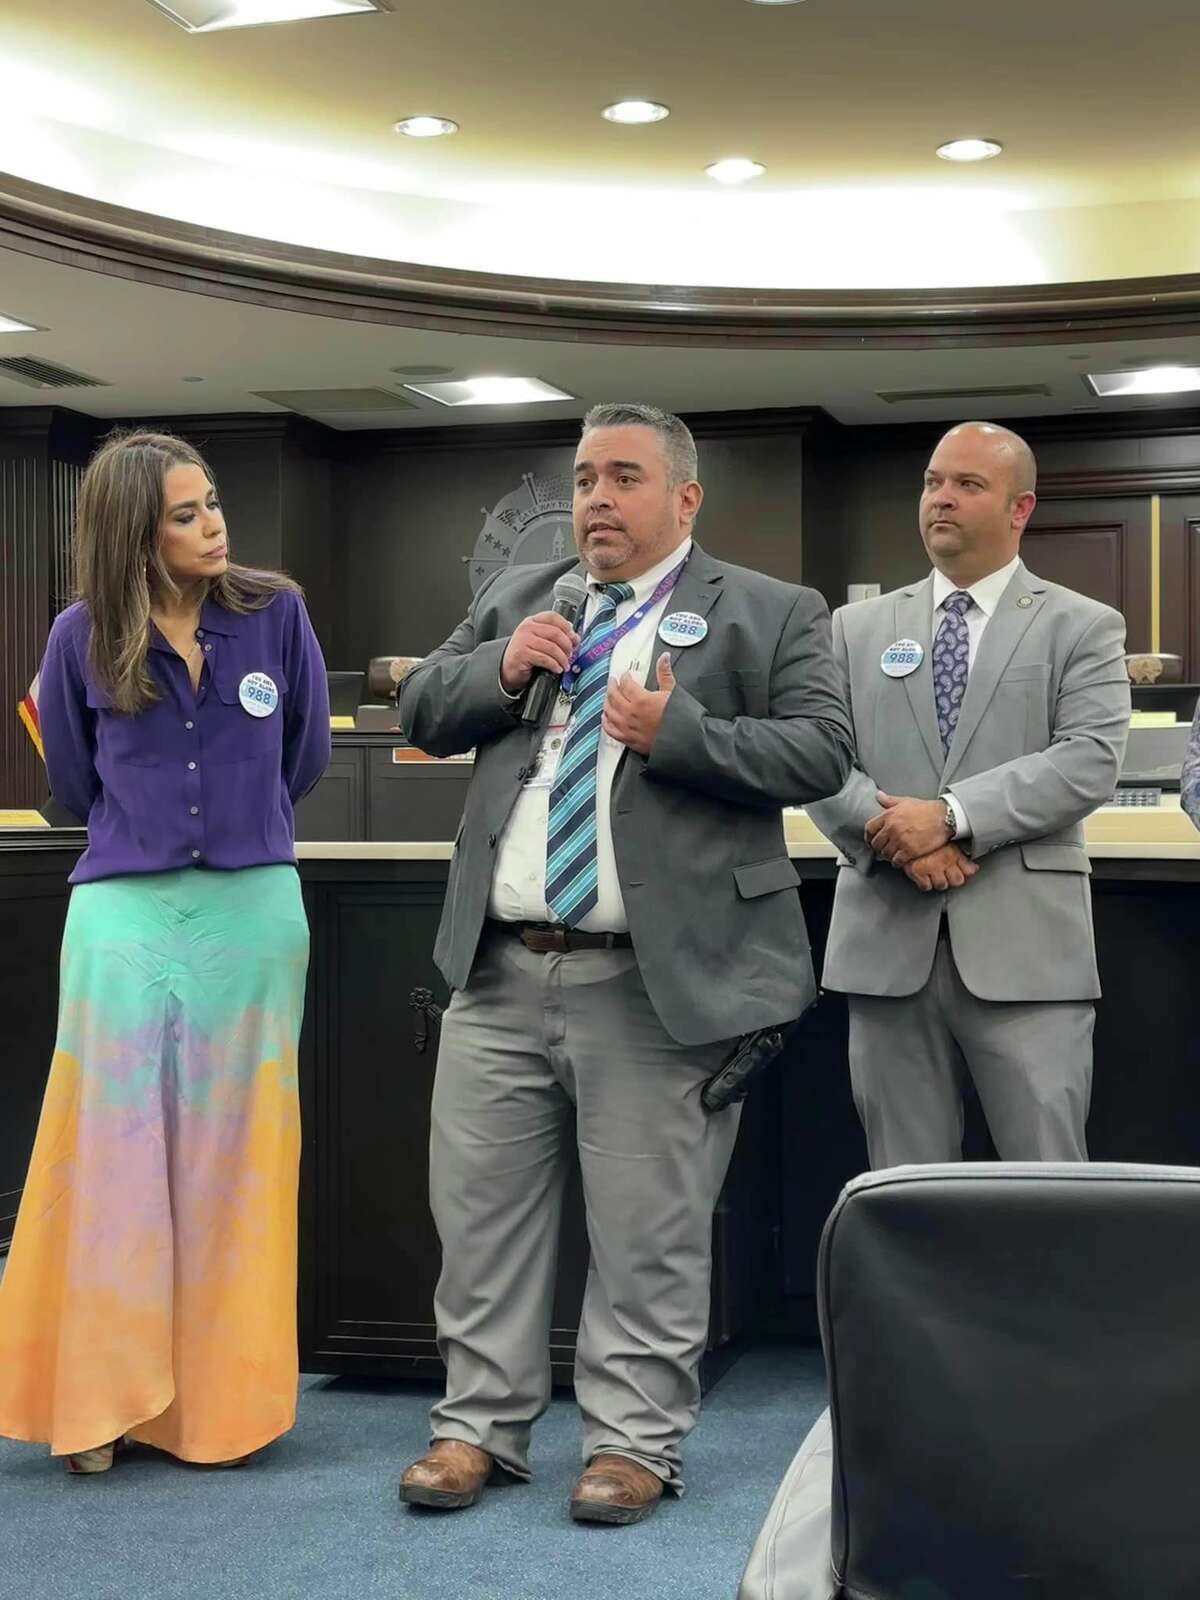 Laredo mayor Dr. Victor Treviño and the City of Laredo proclaimed 2023 in honor of the "You Are Not Alone'" campaign.